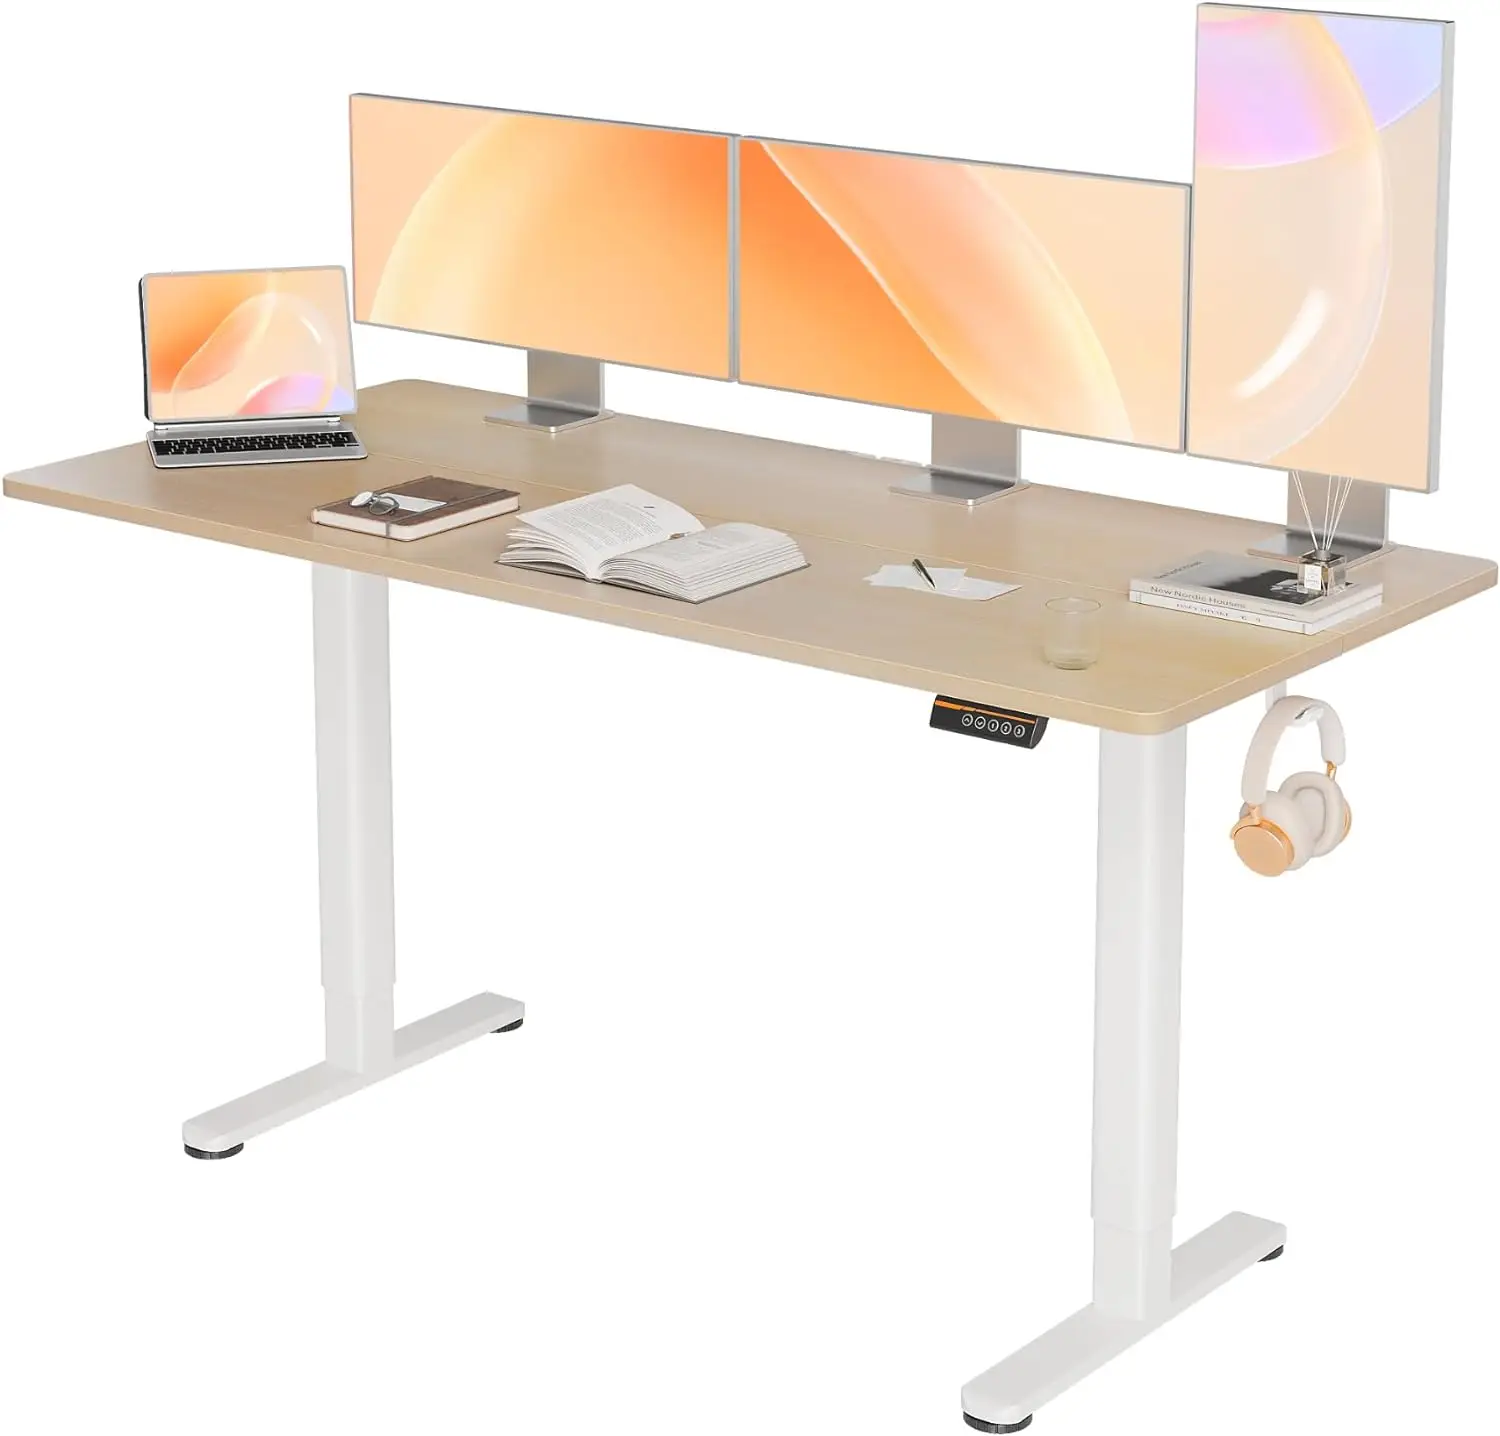 

Electric Standing Desk, Adjustable Height Stand up Desk, 63x24 Inches Sit Stand Home Office Desk with Splice Board,Natural Top